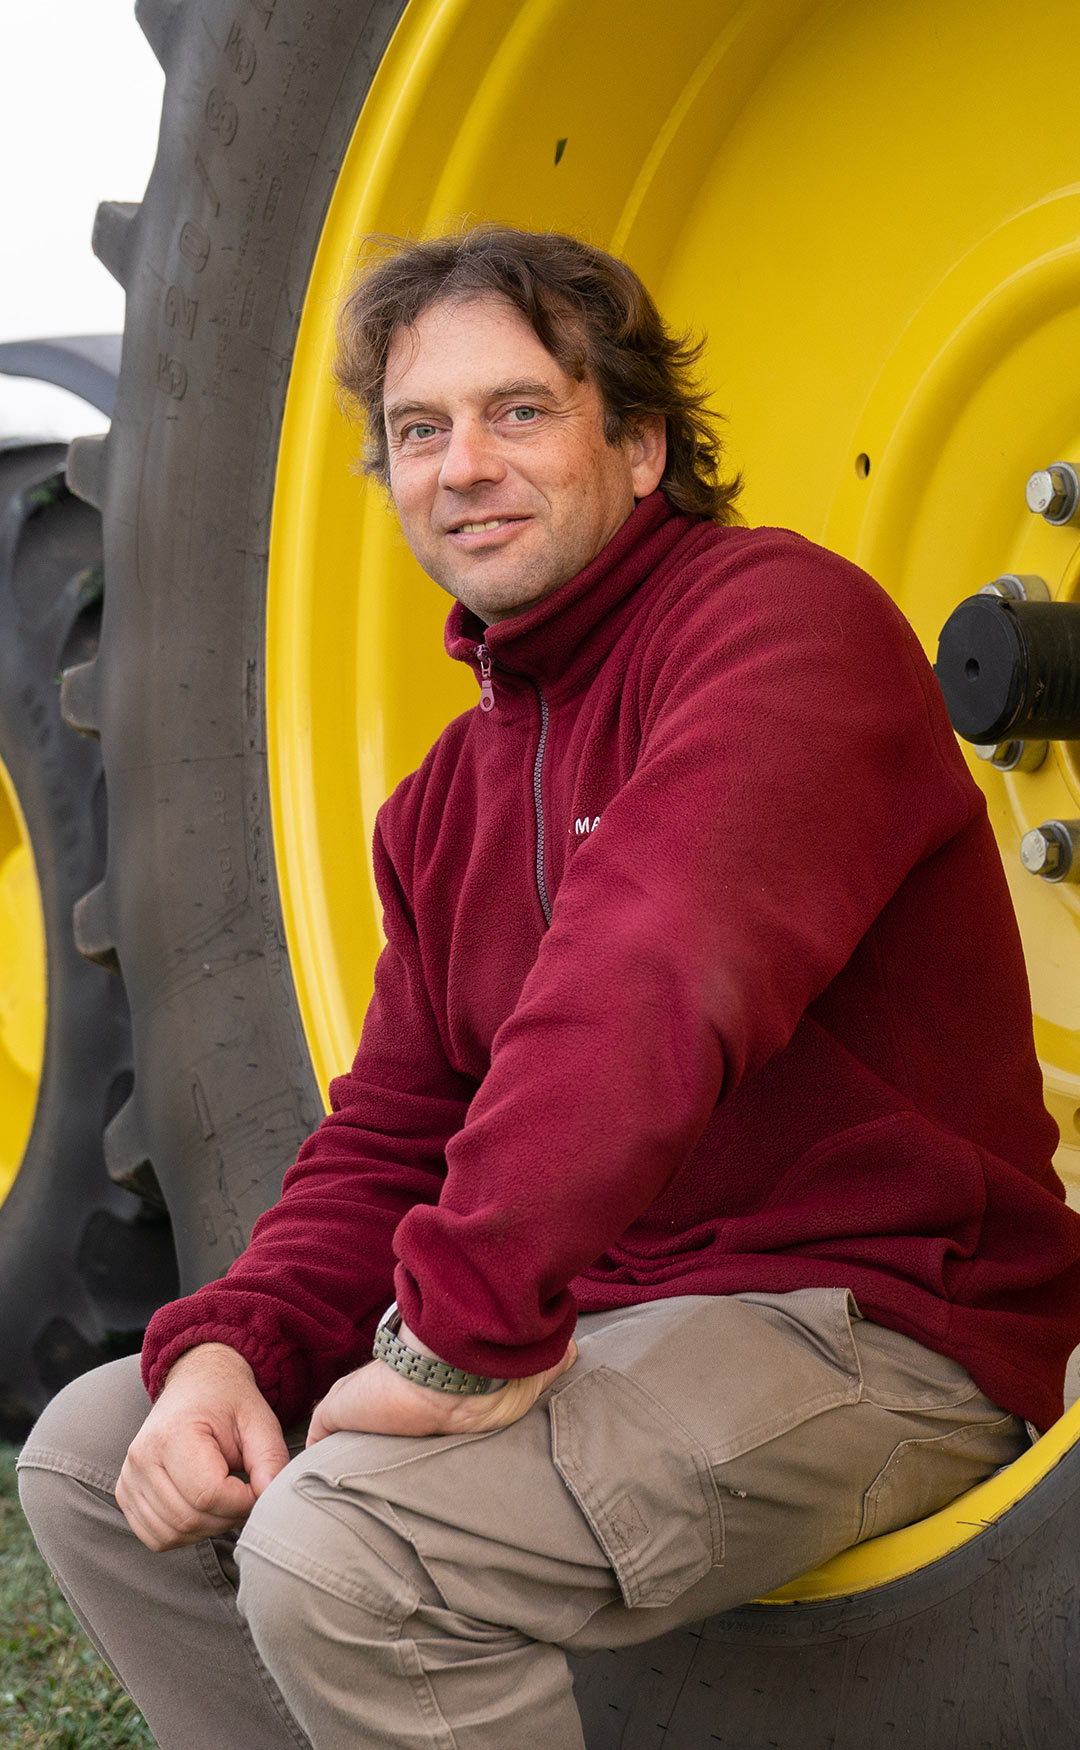 A man sits on the side of a tractor wheel